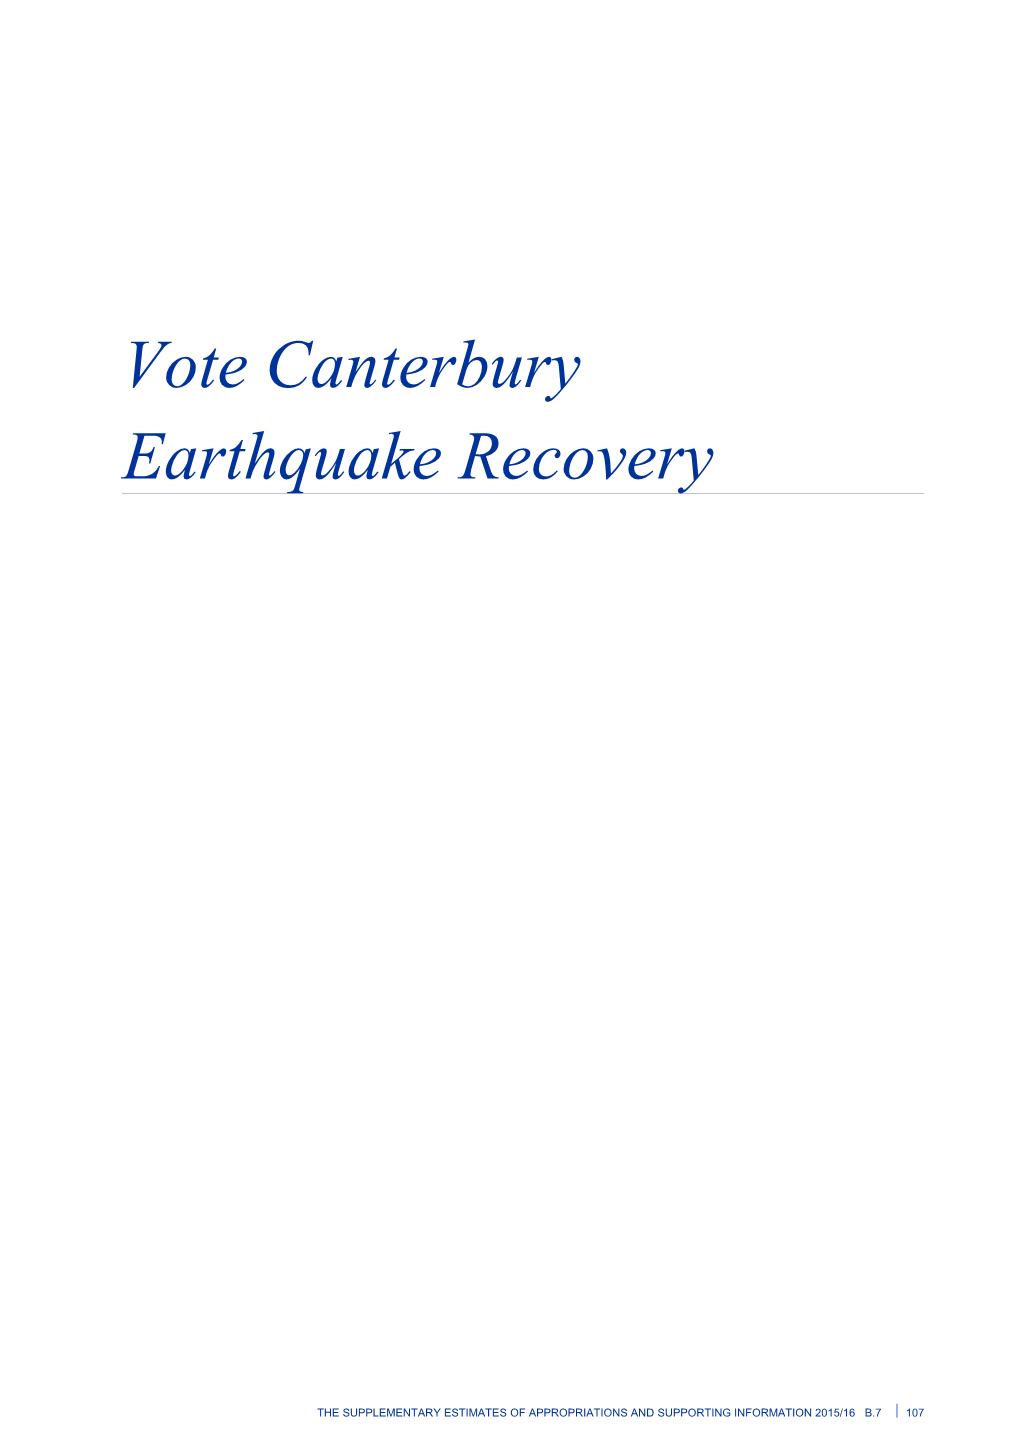 Vote Canterbury Earthquake Recovery - Supplementary Estimates of Appropriations 2015/16